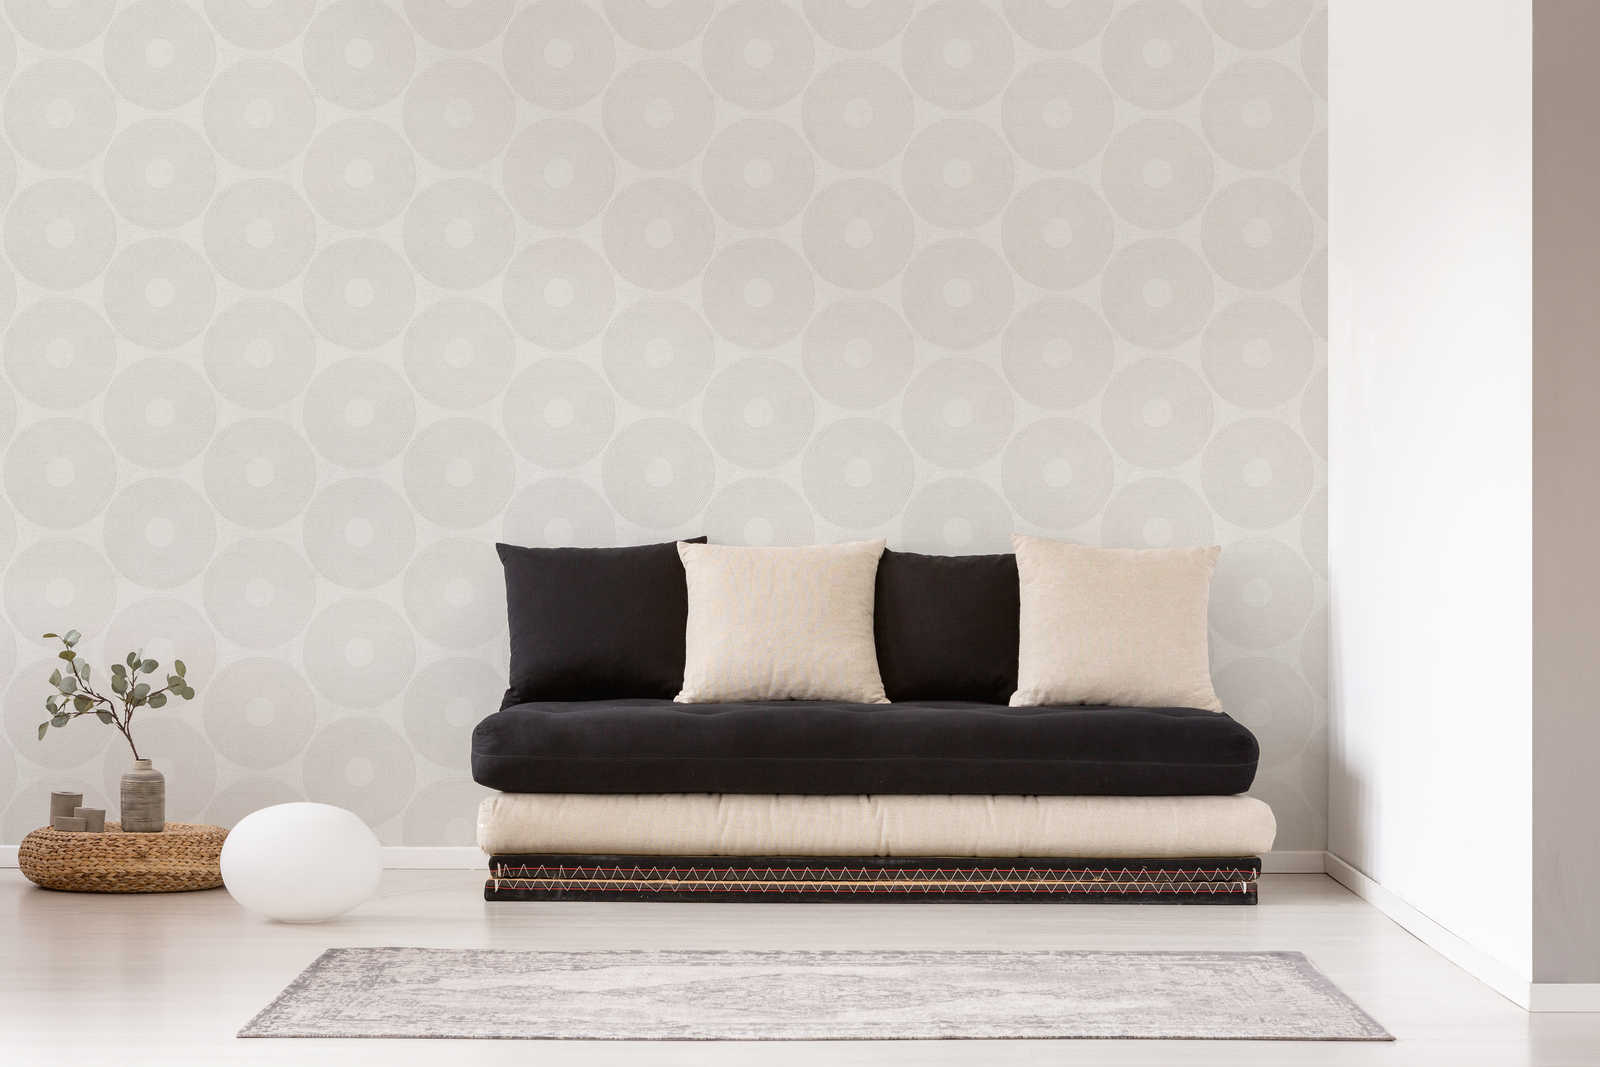             Ethno wallpaper circles with structure design - grey
        